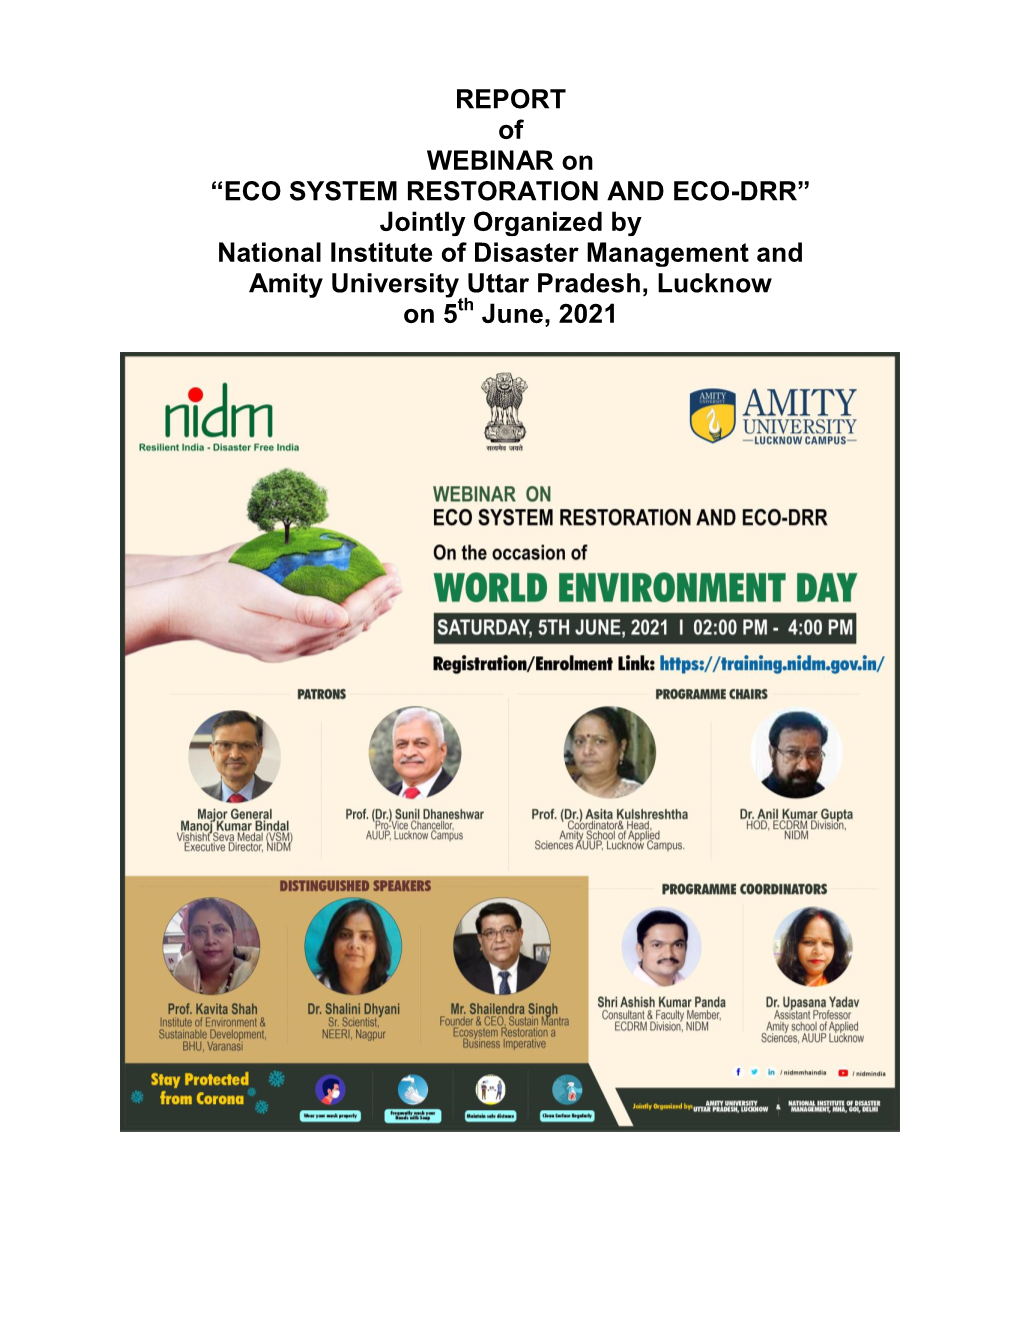 REPORT of WEBINAR on “ECO SYSTEM RESTORATION and ECO-DRR” Jointly Organized by National Institute of Disaster Management An